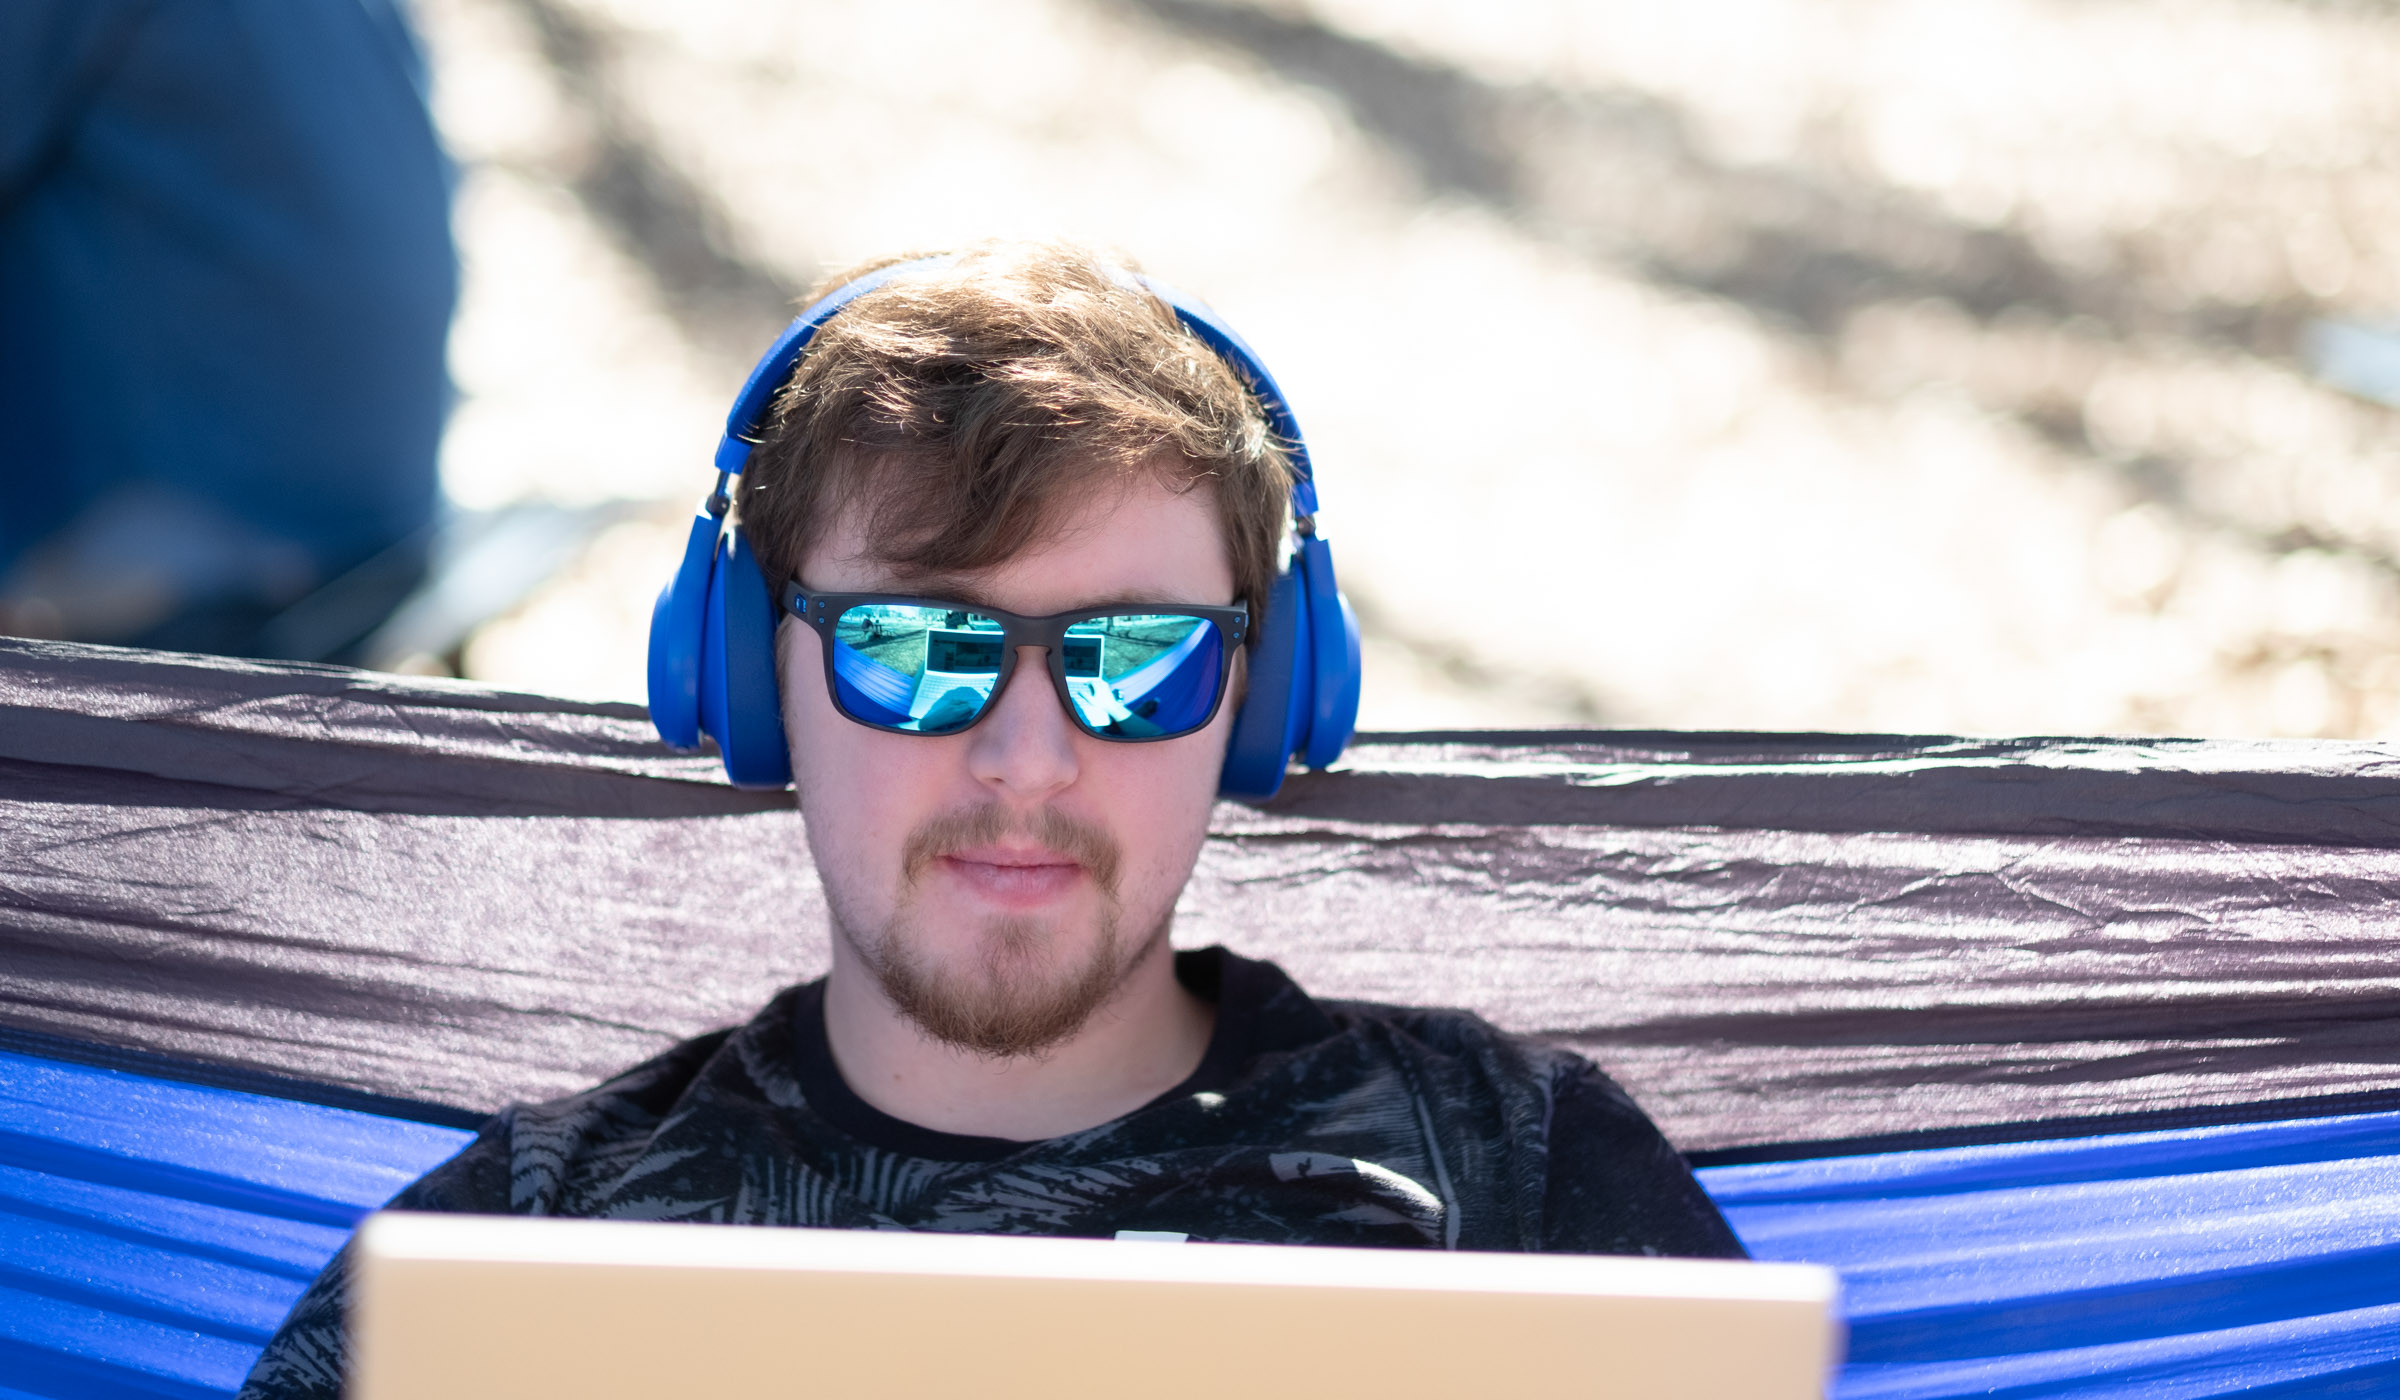 A tight crop on the face of a male student sitting in a blue hamock and wearing sunglasses with blue lenses, reflecting the laptop in his lap.